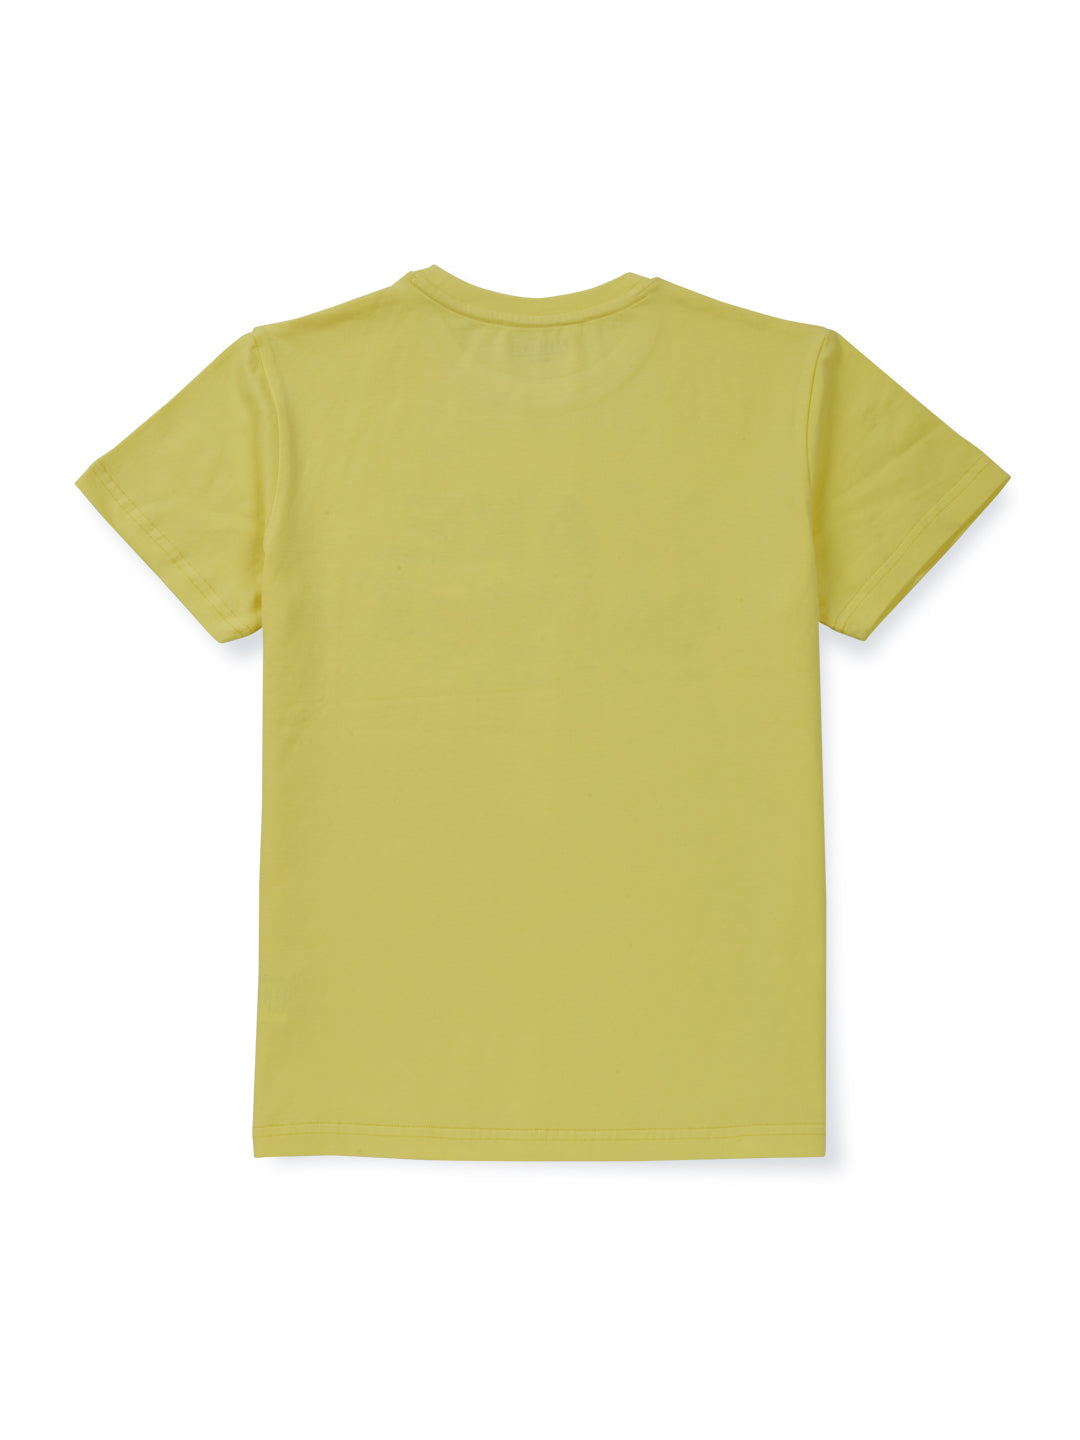 Boys Yellow Cotton Solid T-Shirt